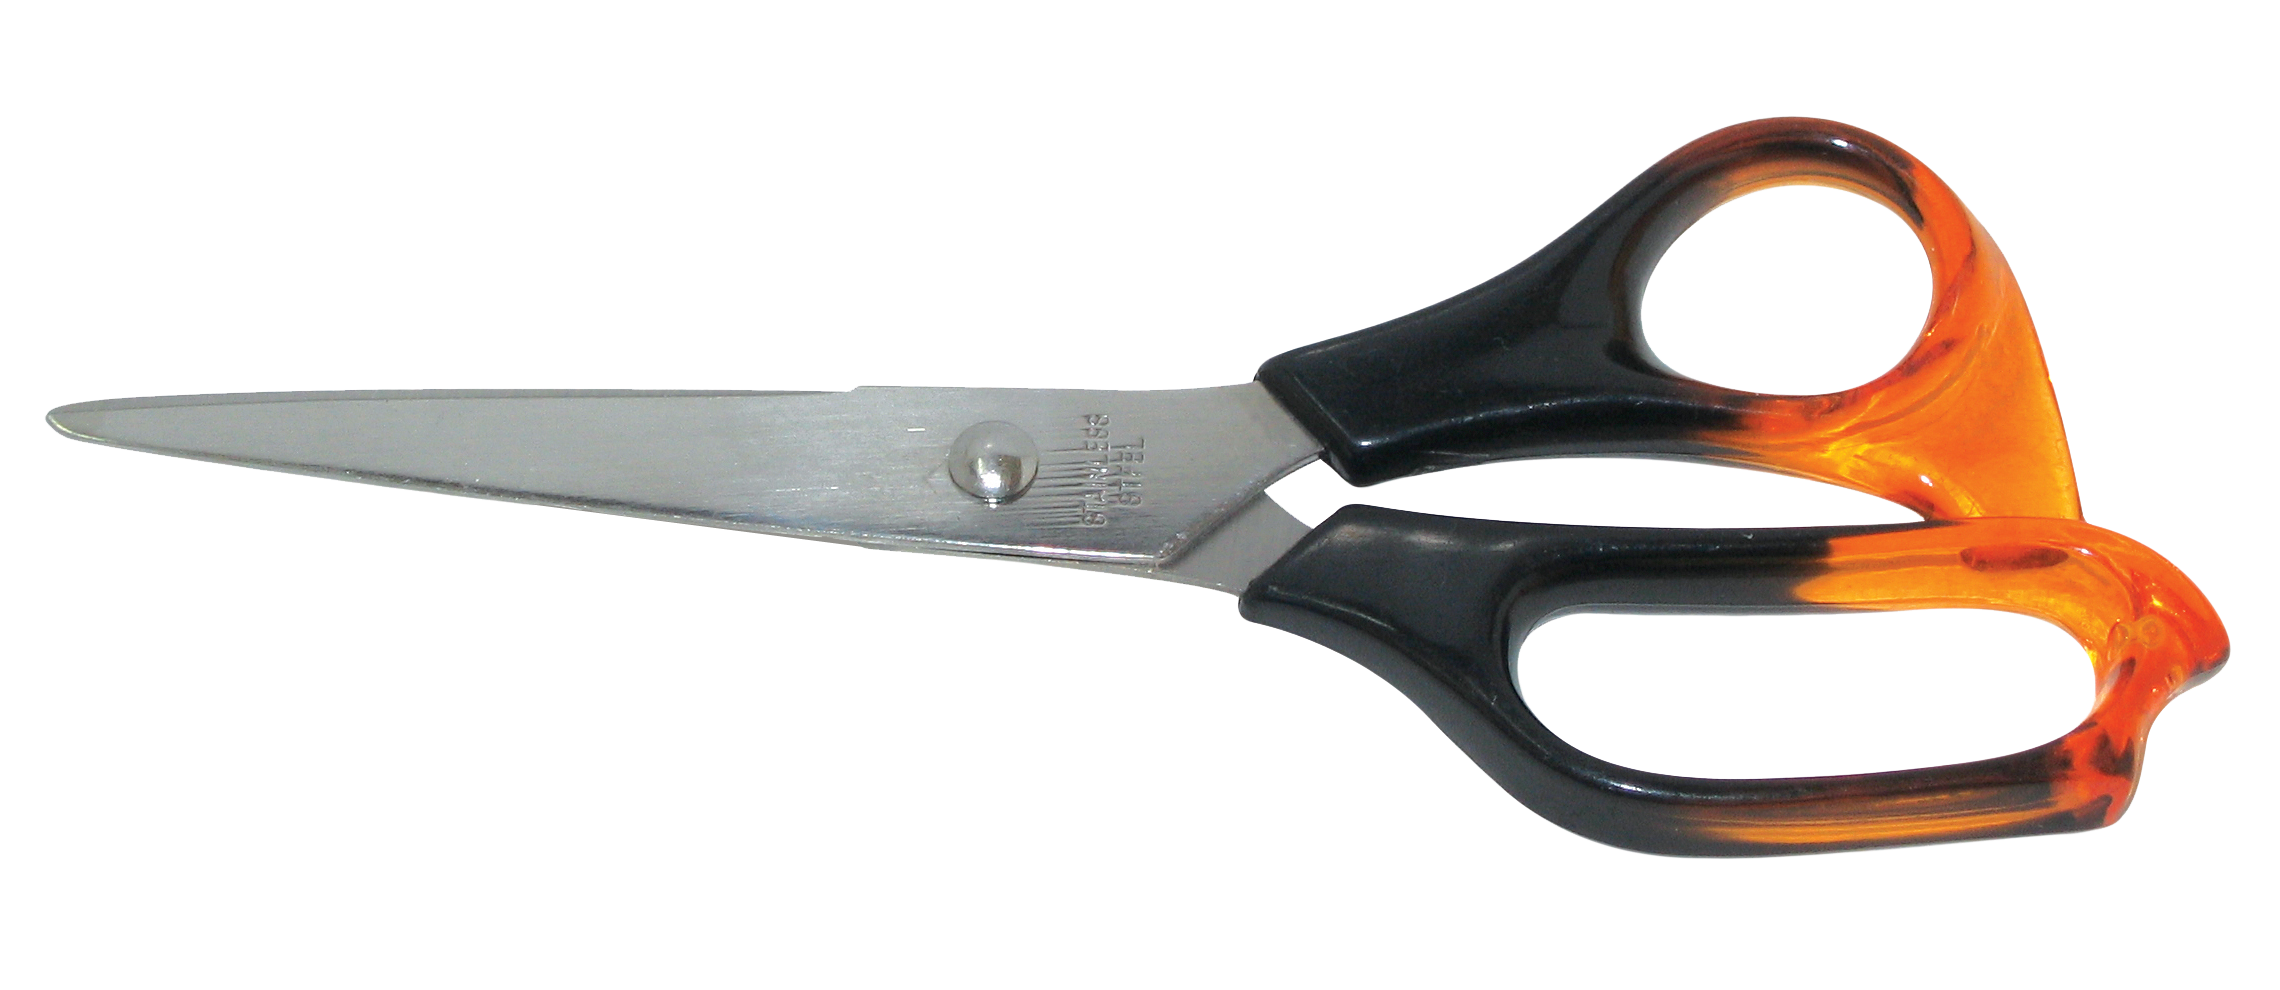 A Pair Of Scissors With Black Handles